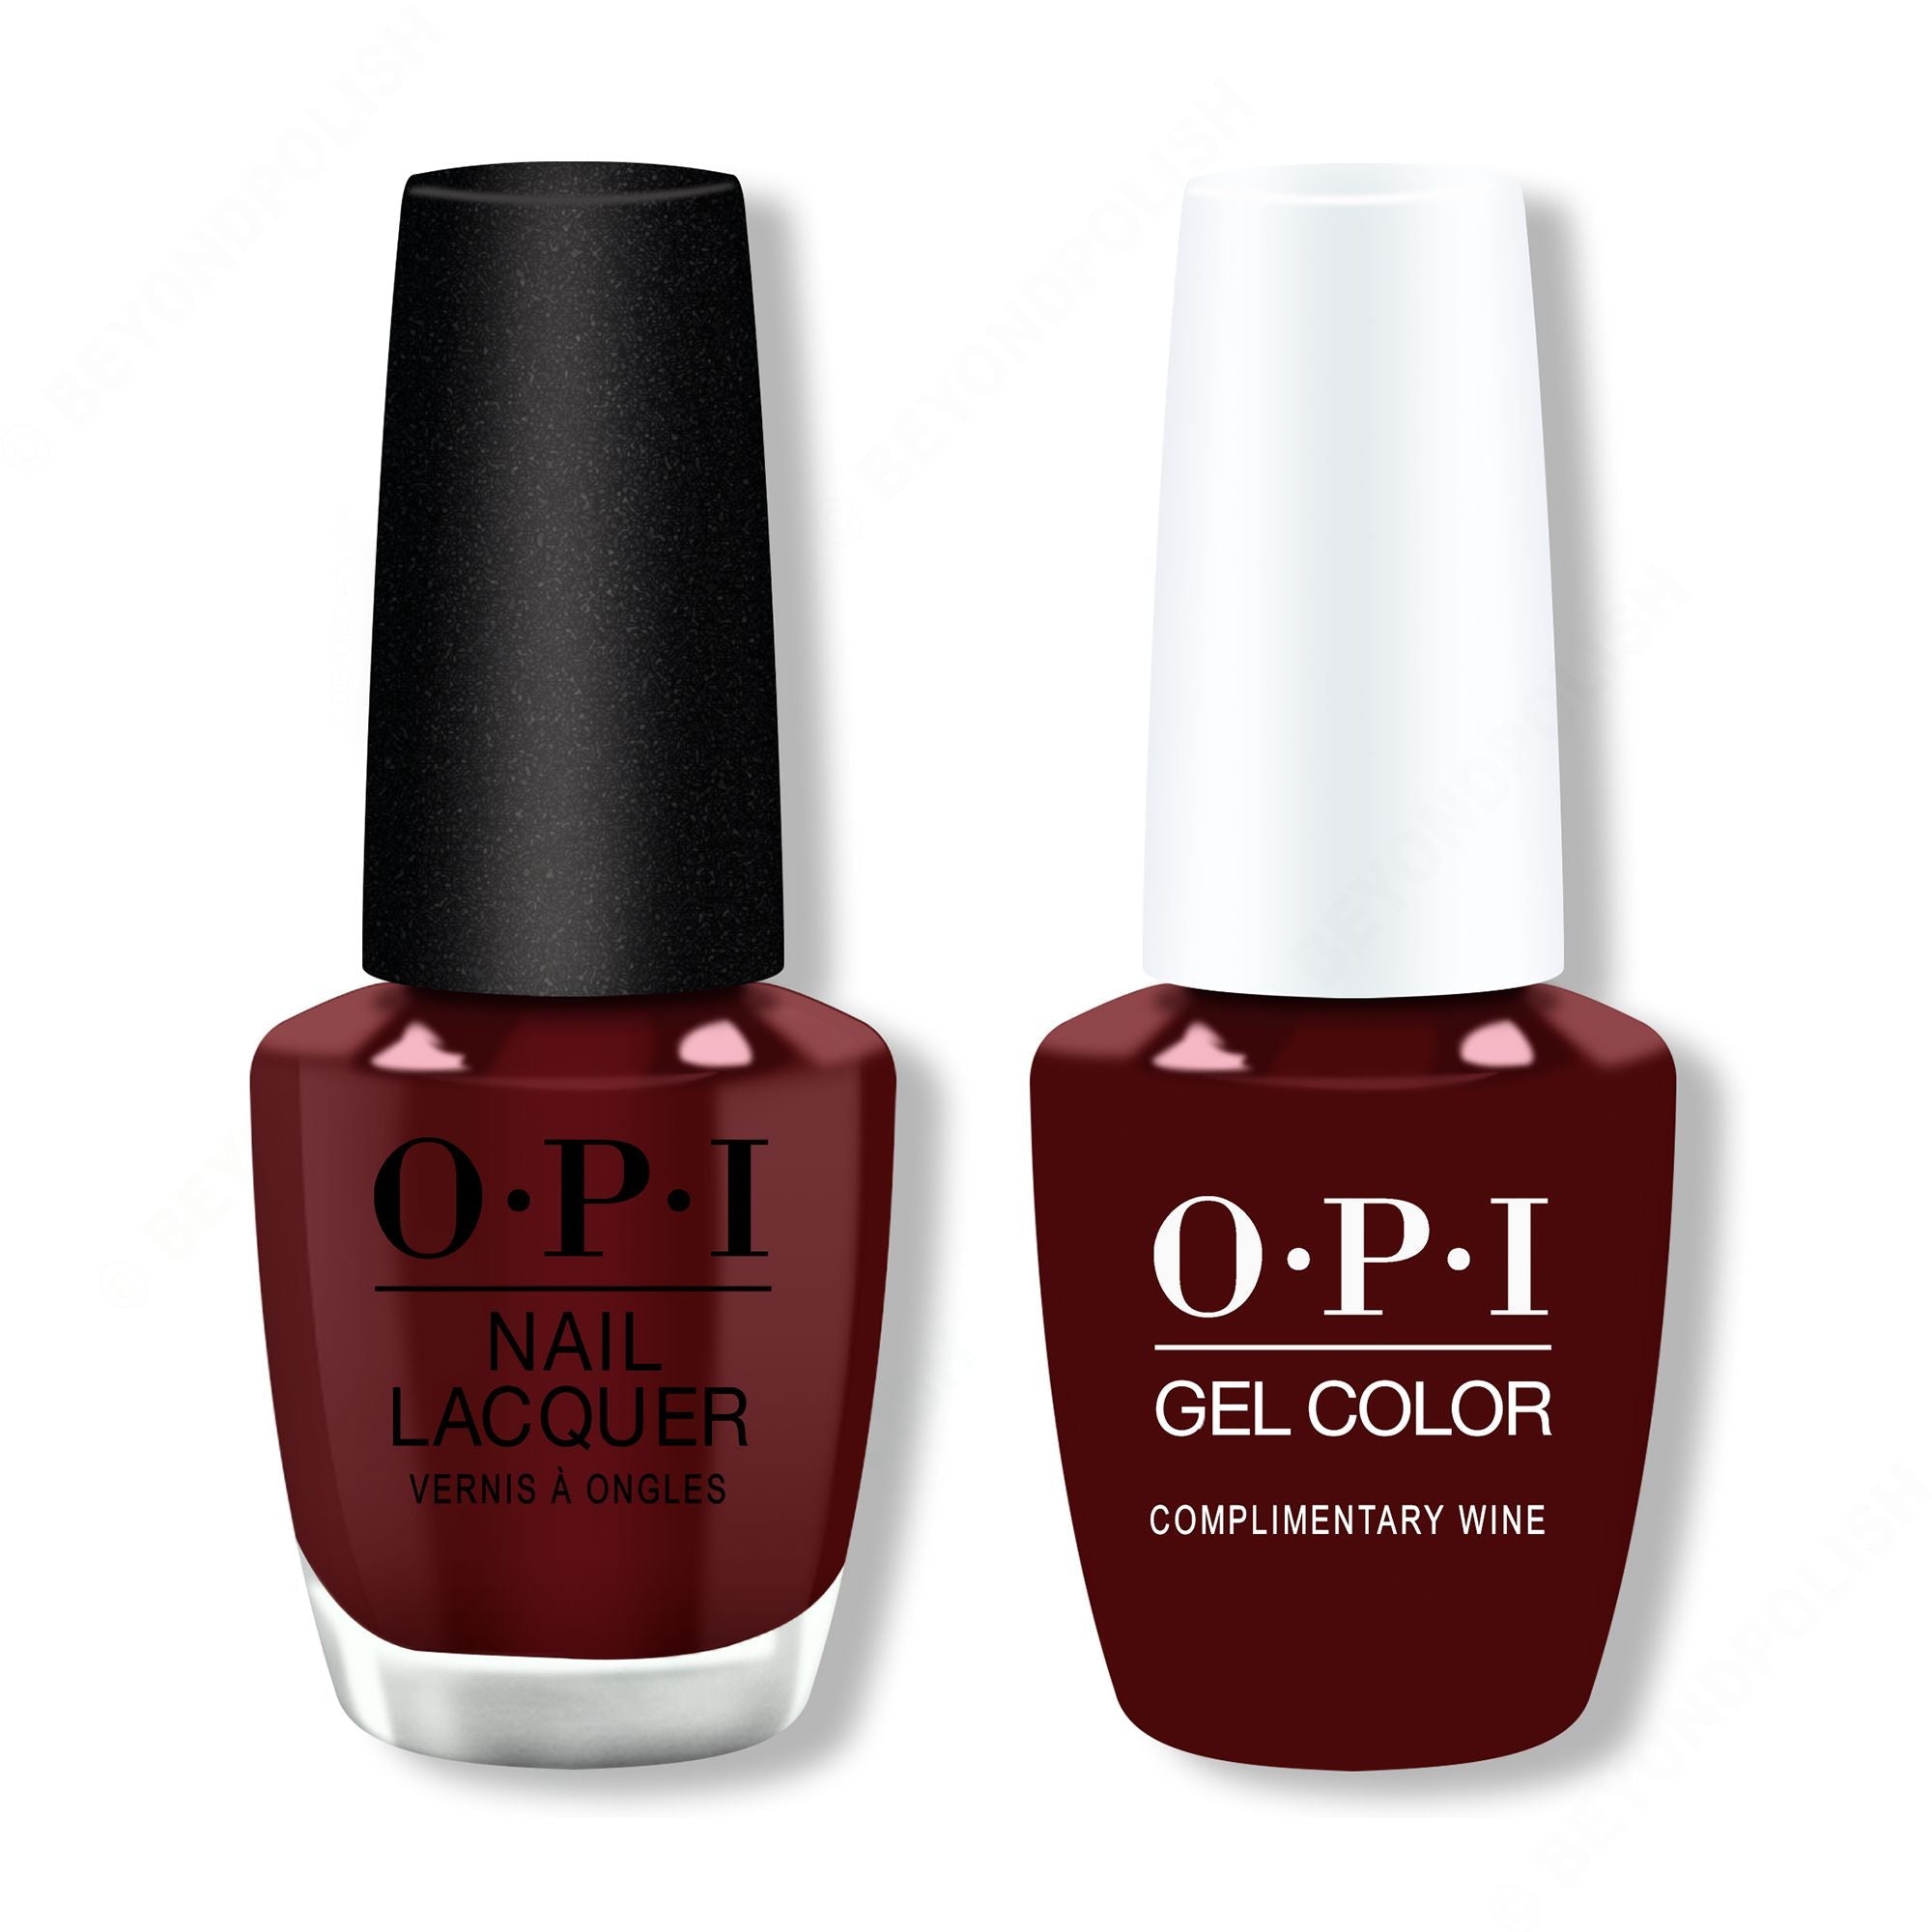 OPI - Gel & Lacquer Combo - Complimentary Wine - Gel & Lacquer Polish at Beyond Polish